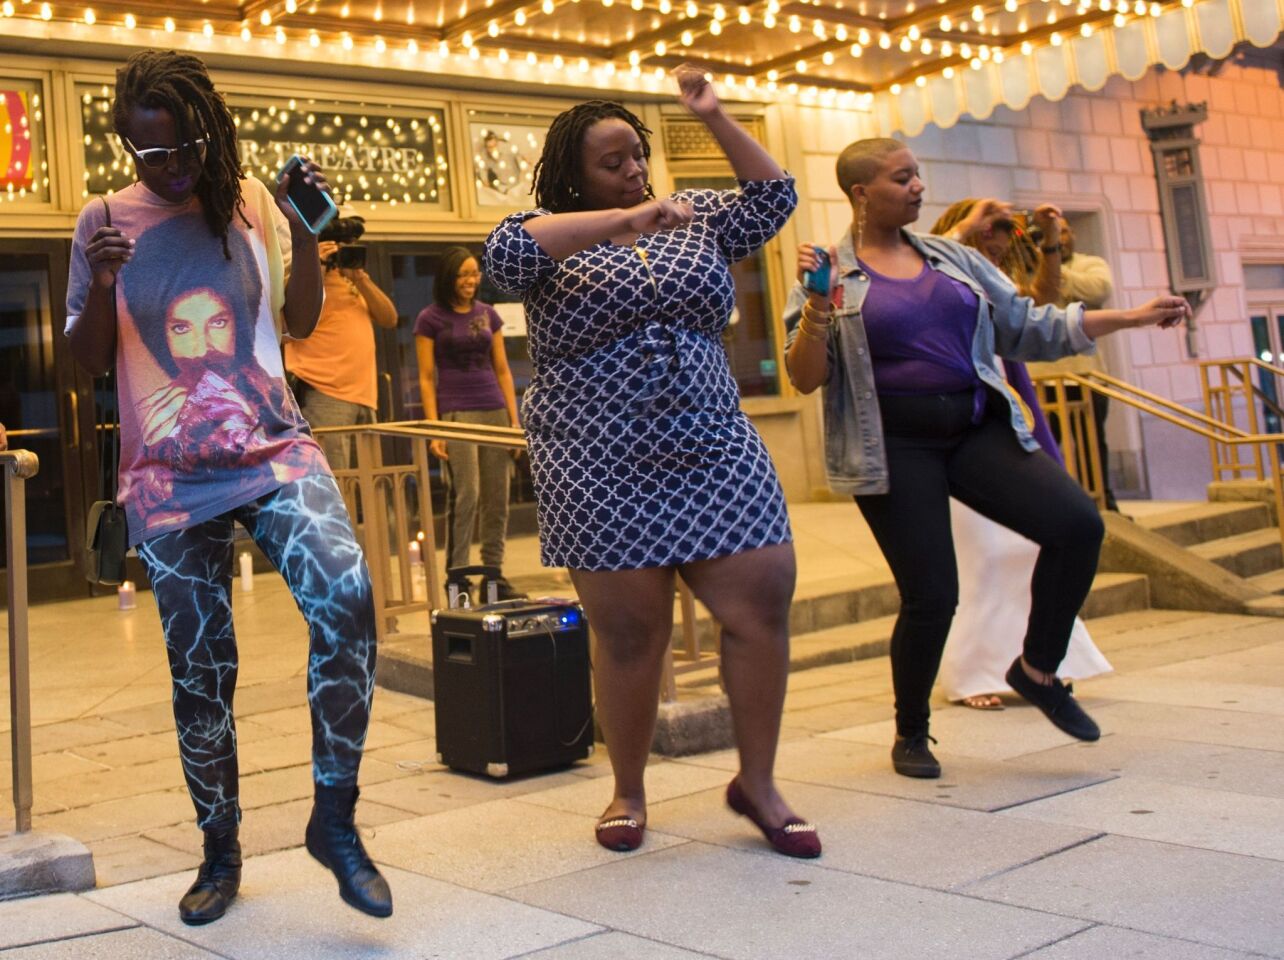 People dance during a candle light vigil in remembrance of Prince outside the Warner Theatre in Washington, DC.